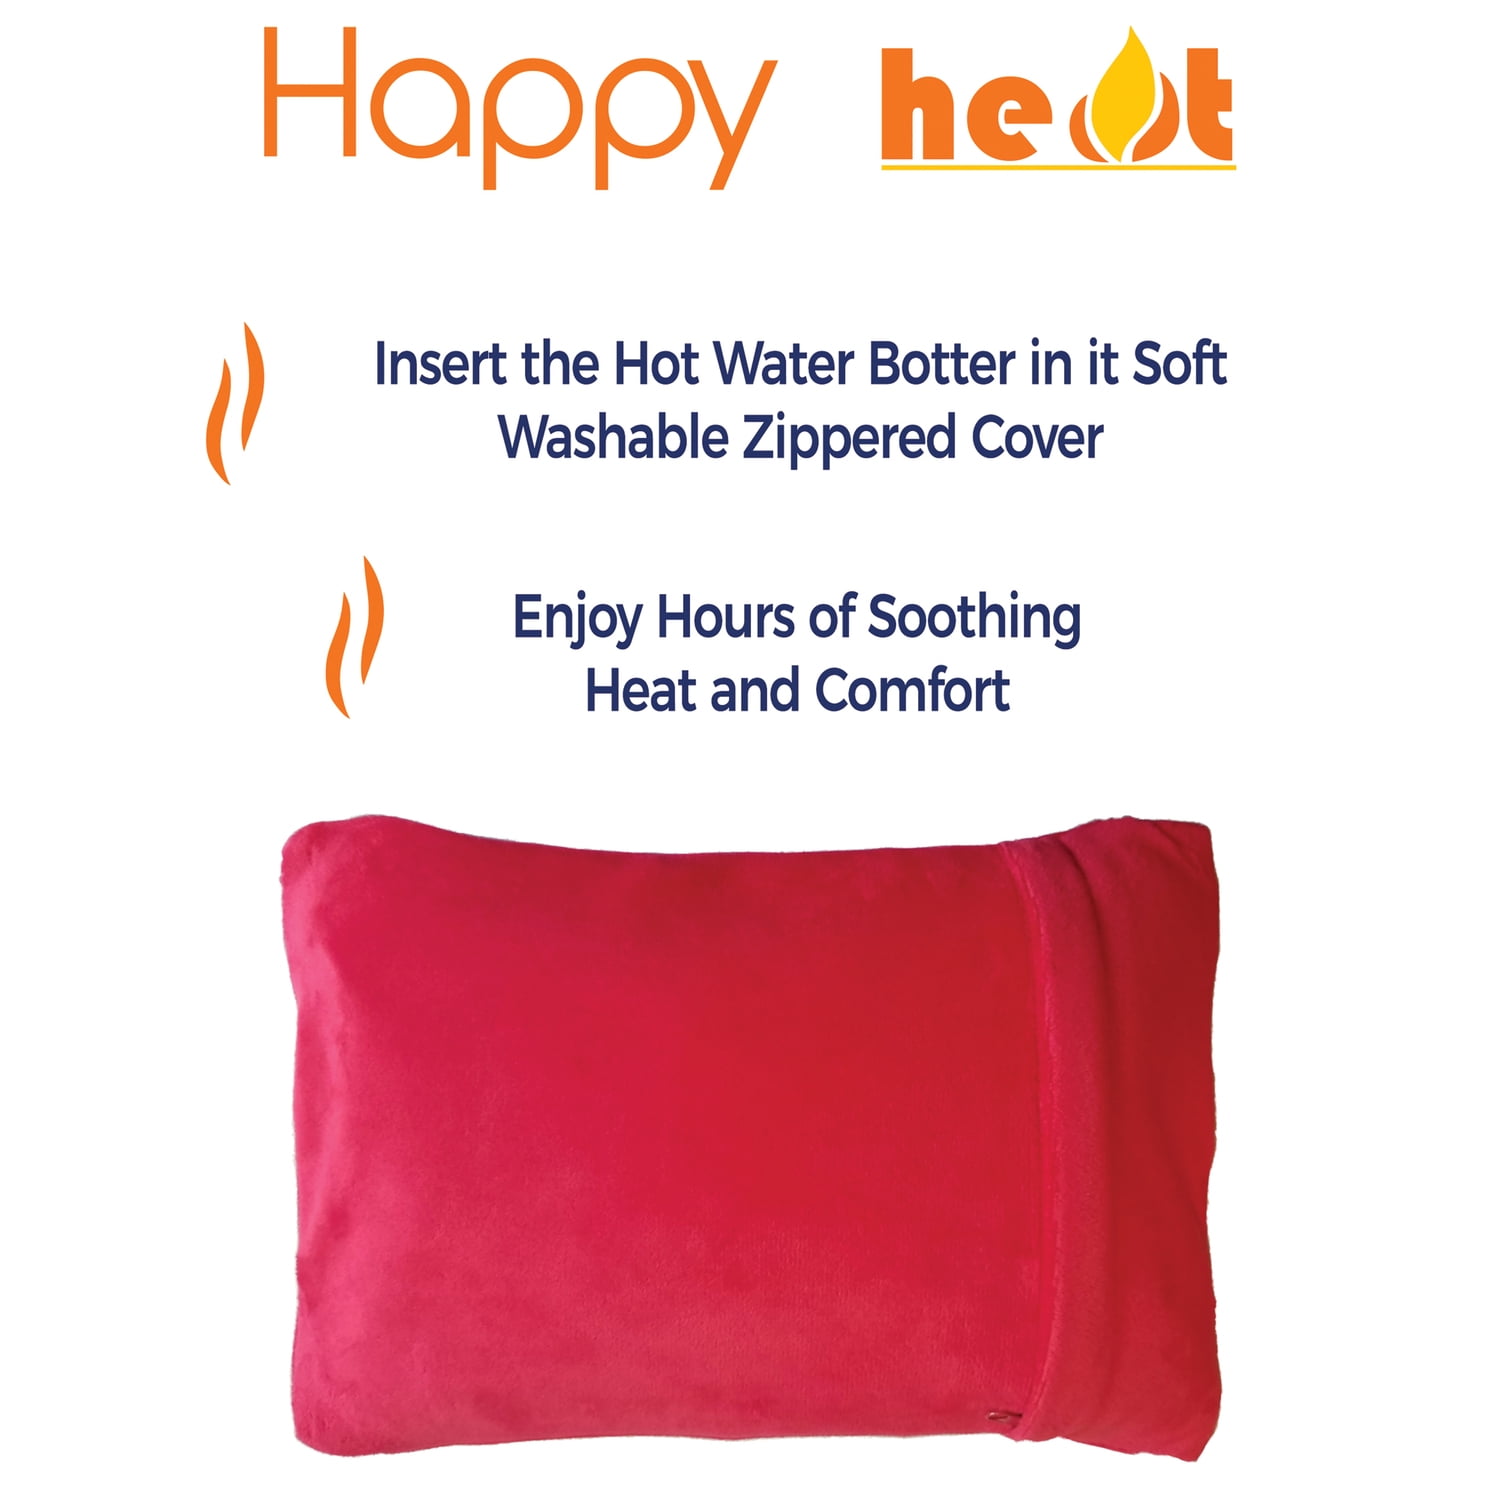  Happy Heat Hot Water Bottle Electric with Cover, Heating Pad,  Warm Compress Bag for Menstrual/Period Cramps, Neck, Back, Shoulder Pain &  More, Hot Pack, Reusable & Rechargeable Stomach Warmer - Red 